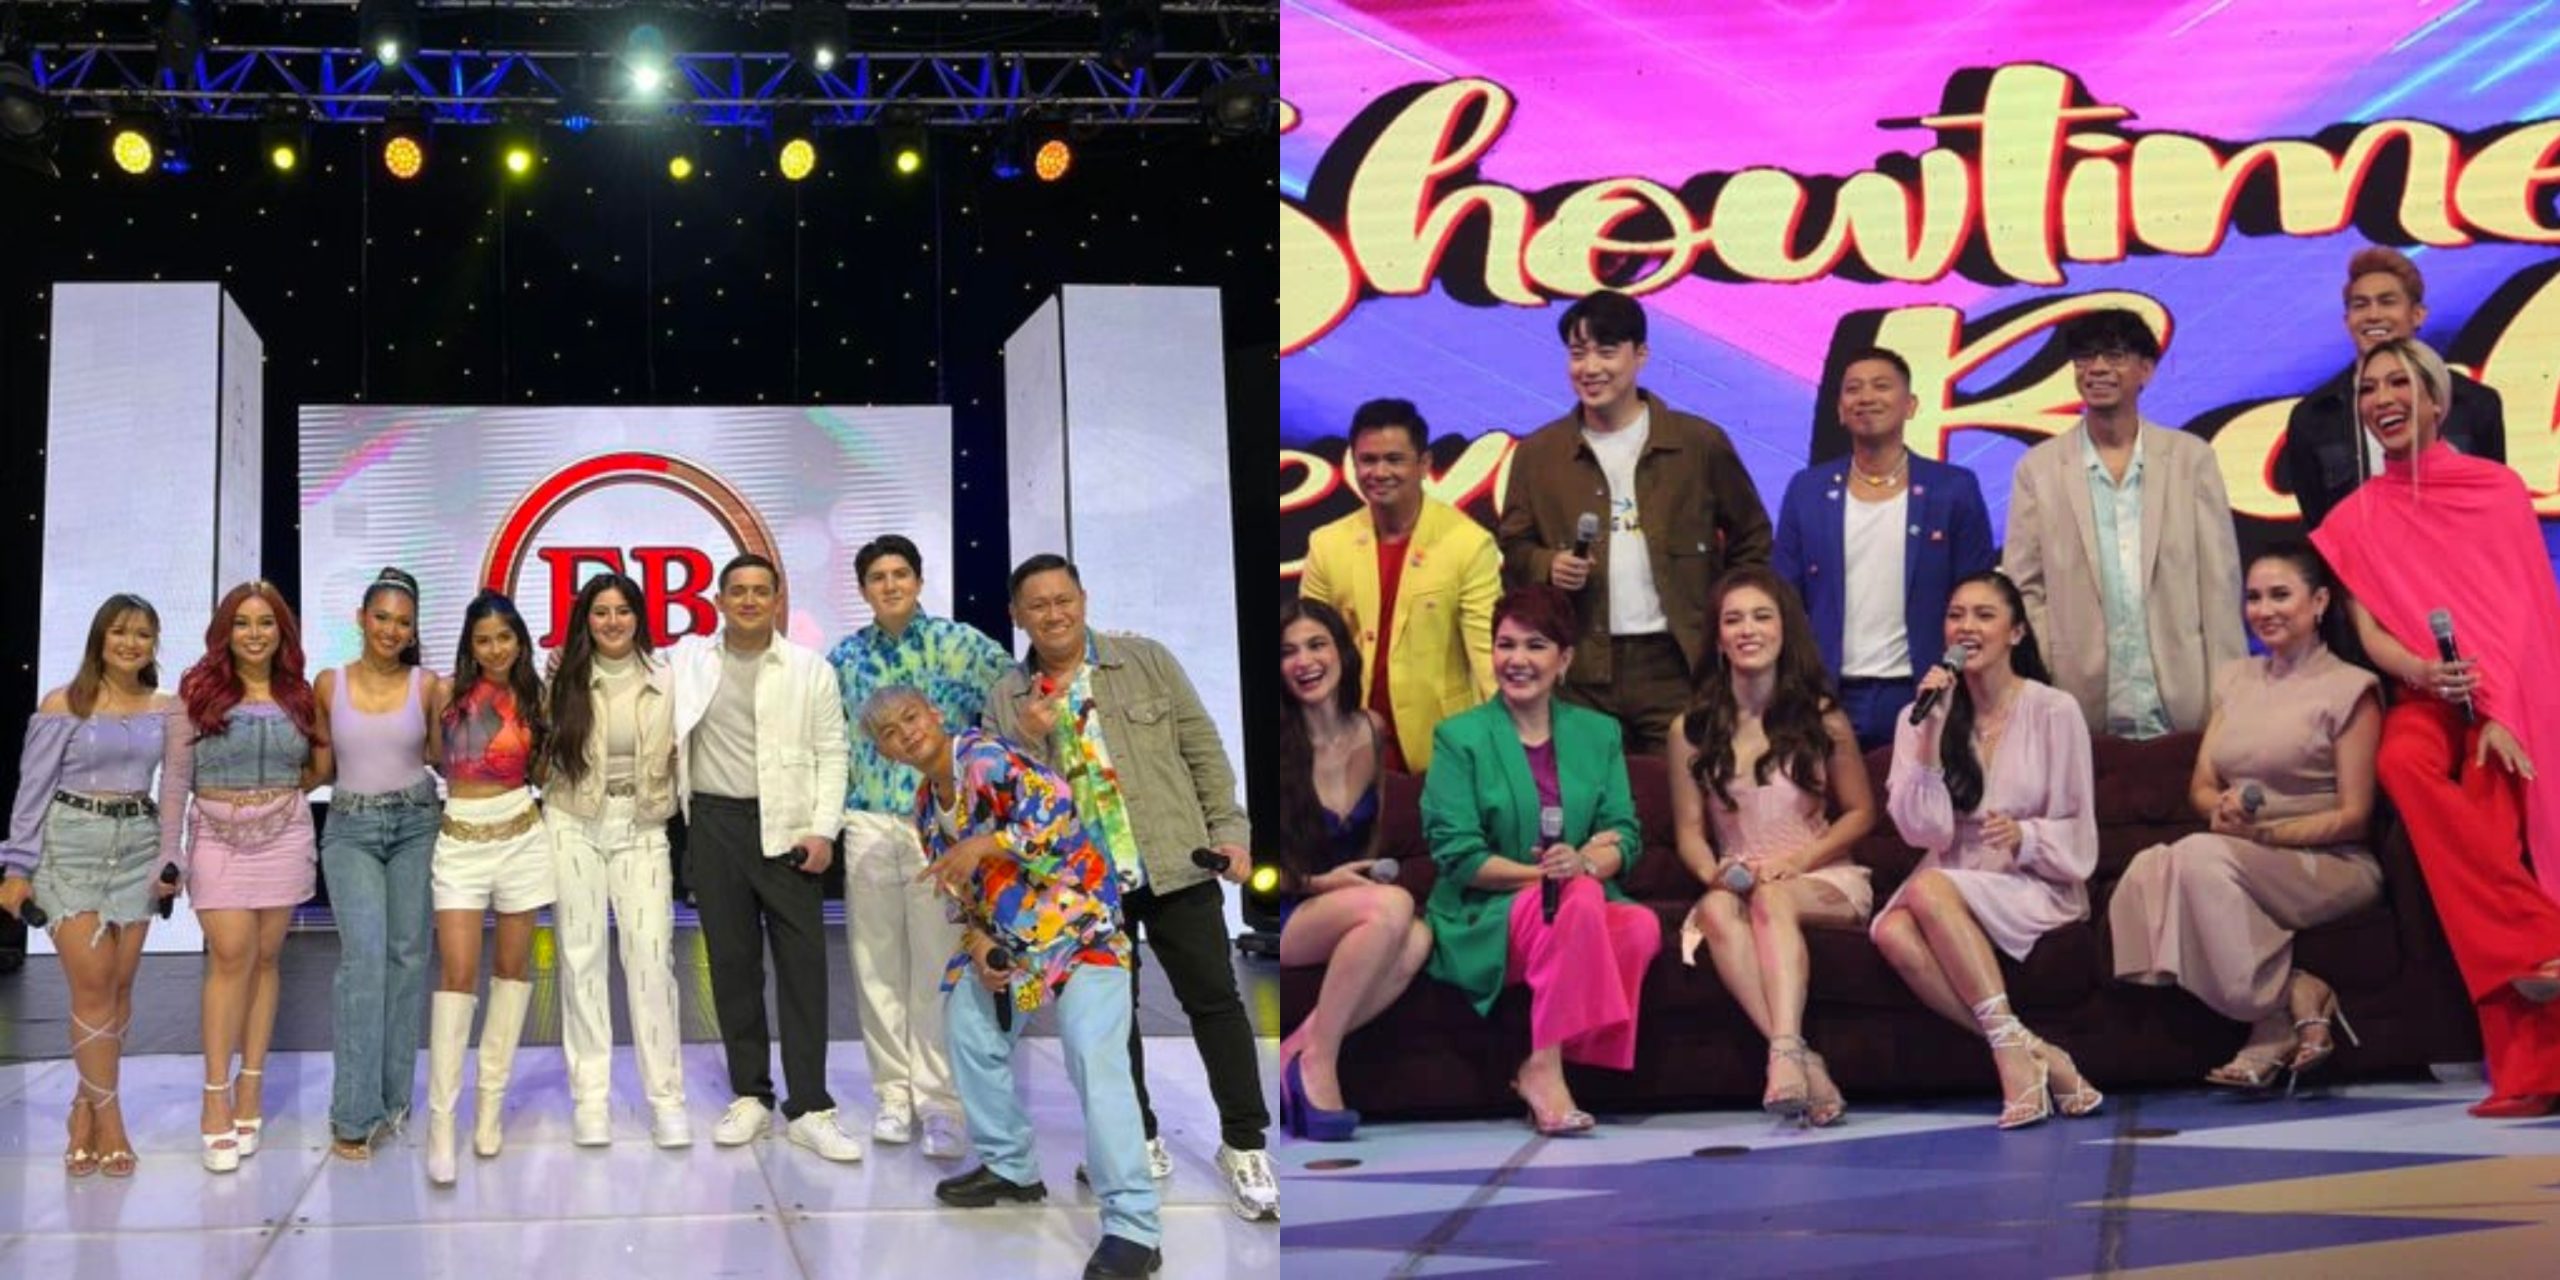 Number 1 parin! Rebranded Eat Bulaga outperforms It's Showtime in ratings